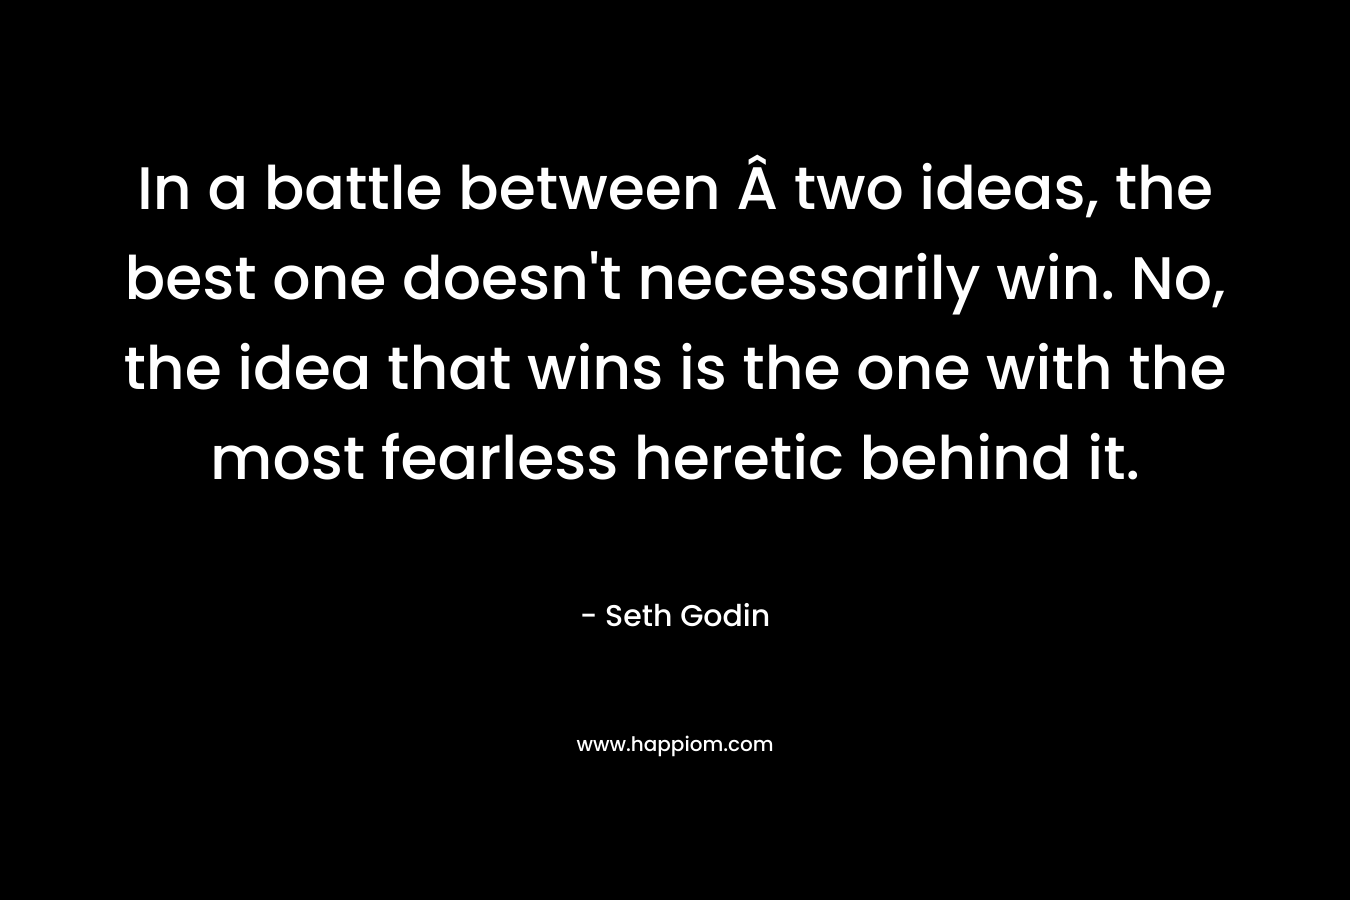 In a battle between Â two ideas, the best one doesn't necessarily win. No, the idea that wins is the one with the most fearless heretic behind it.